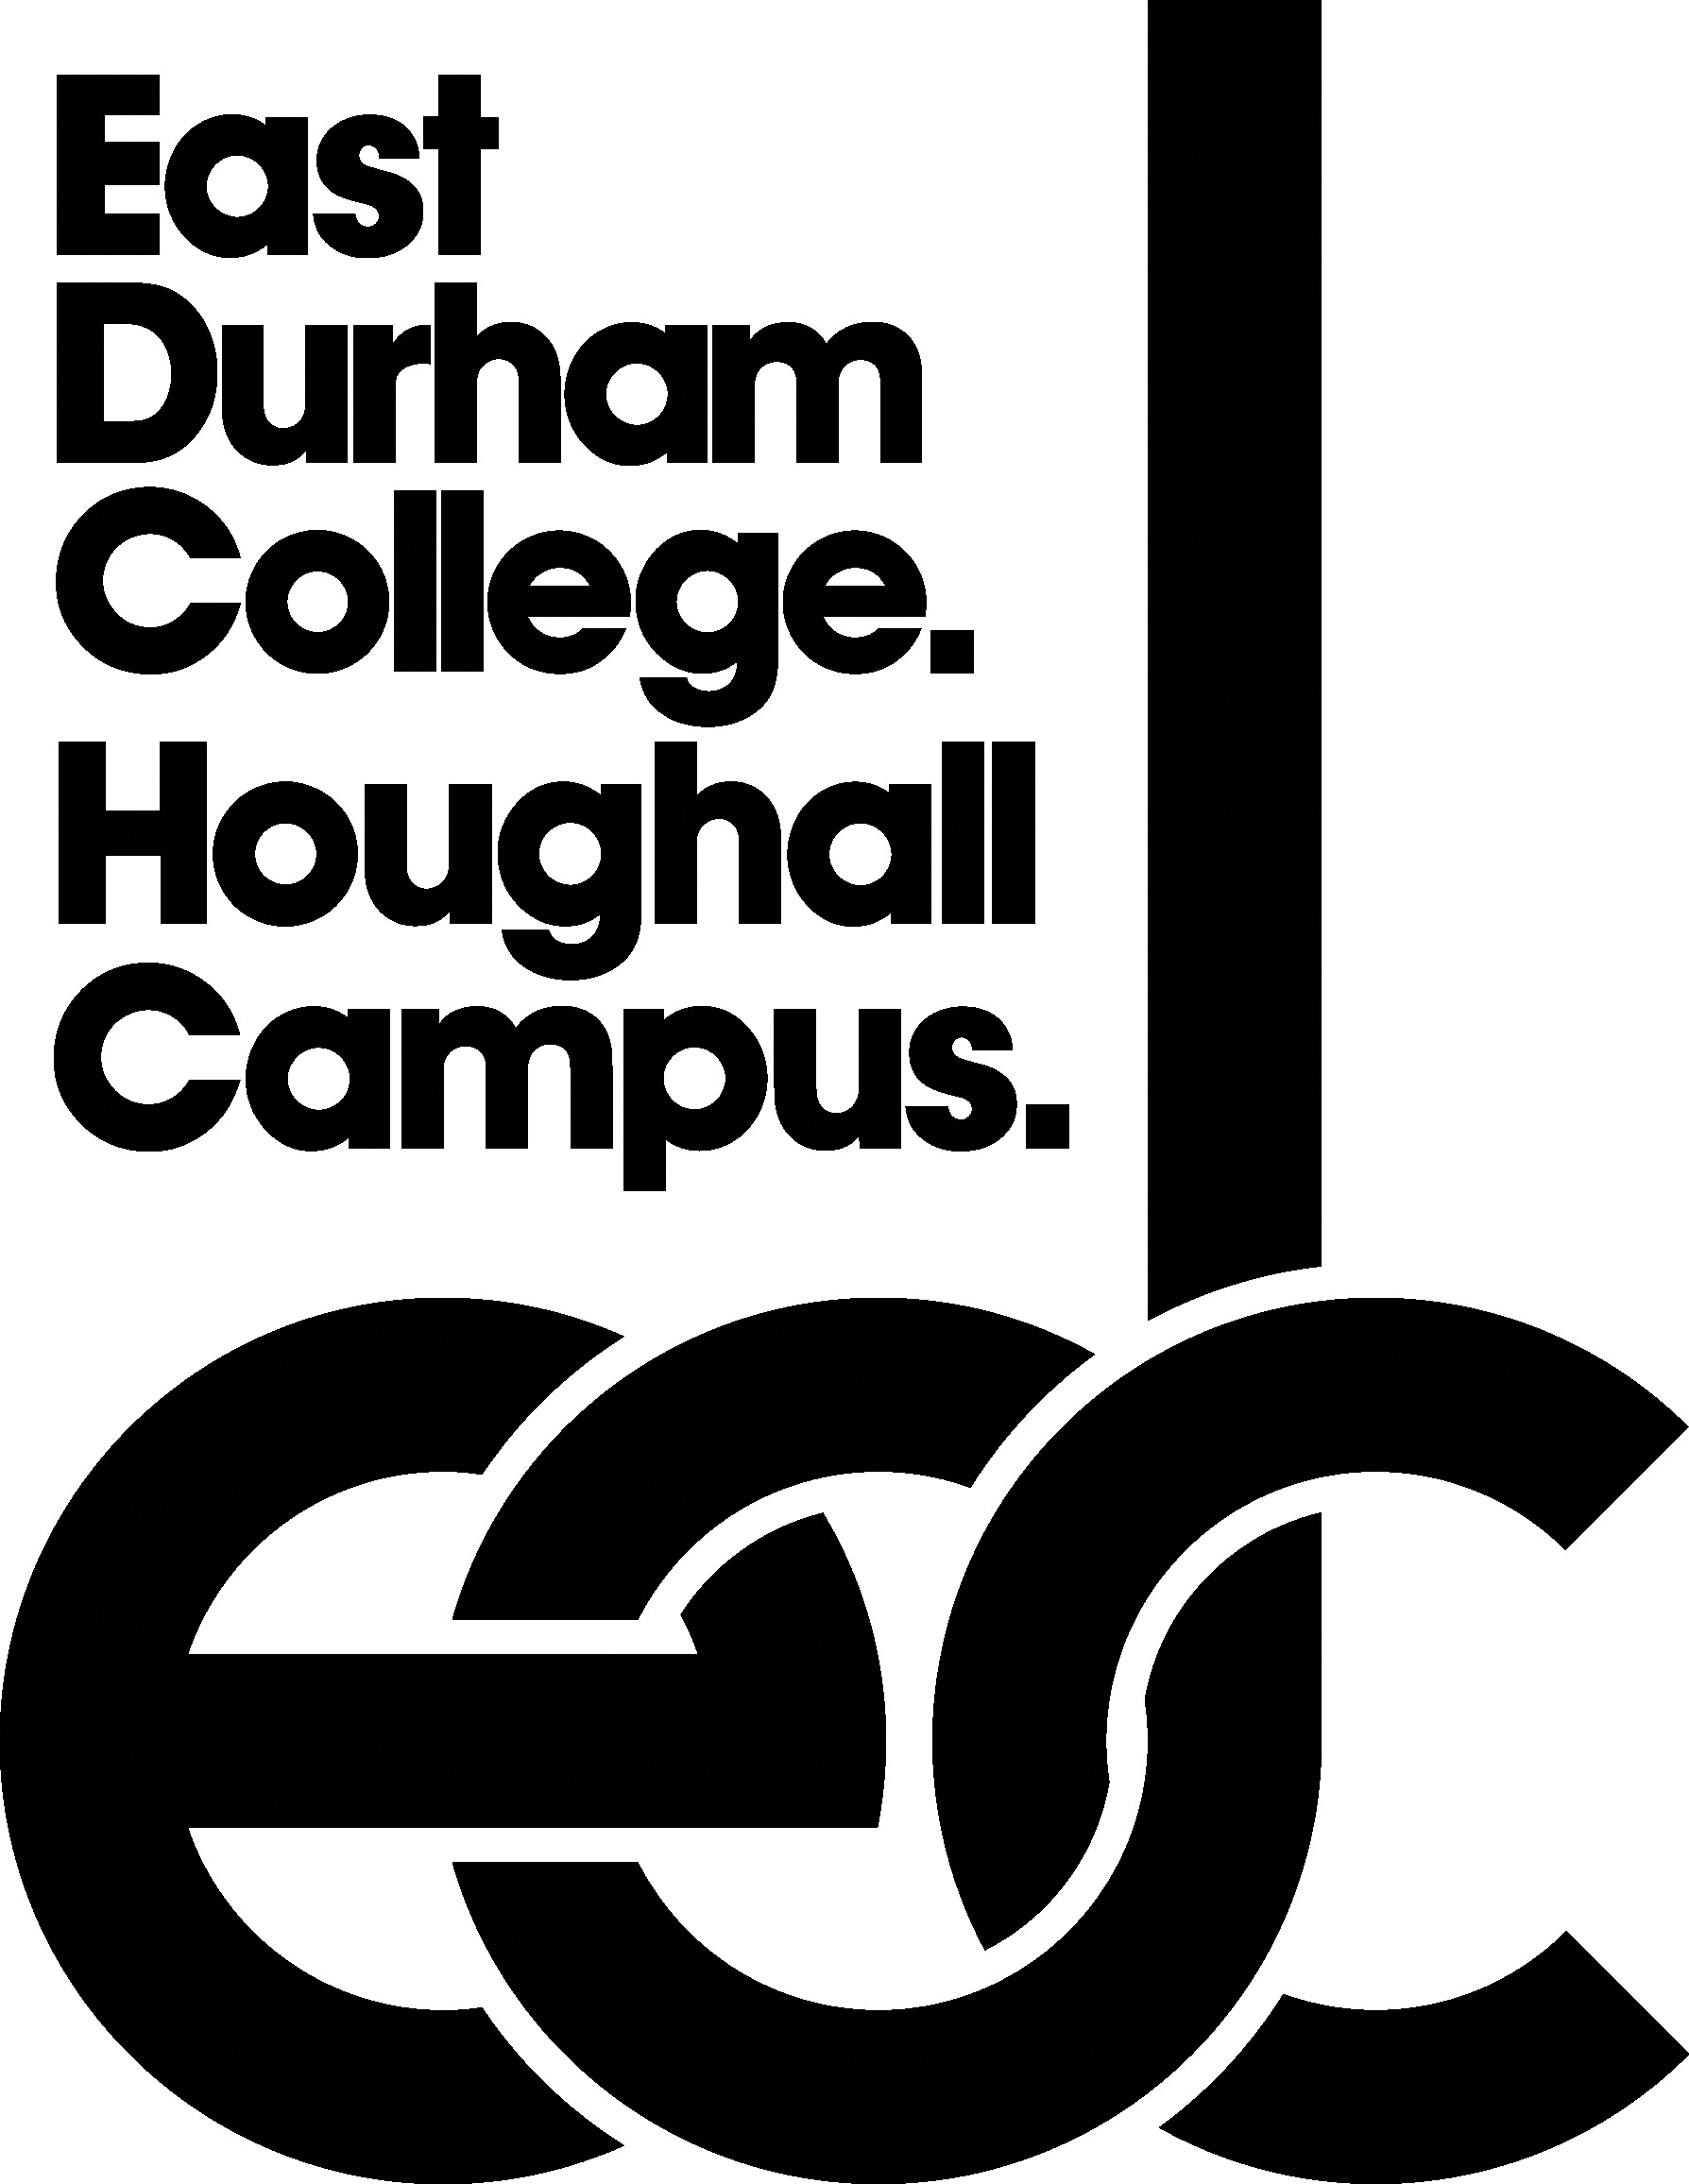 Sponsored by East Durham College